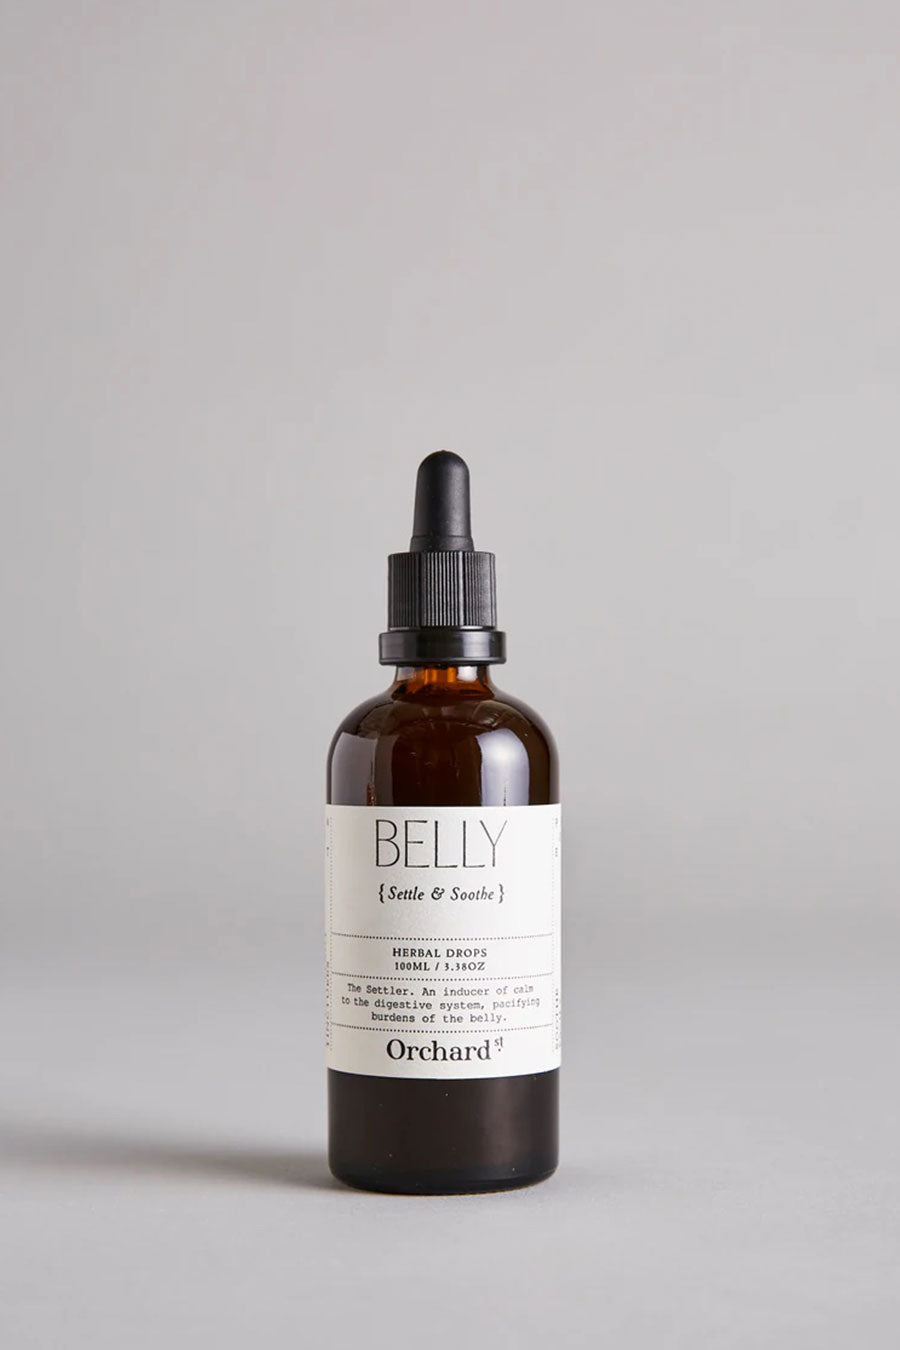 Orchard St Herbal Drops - Belly